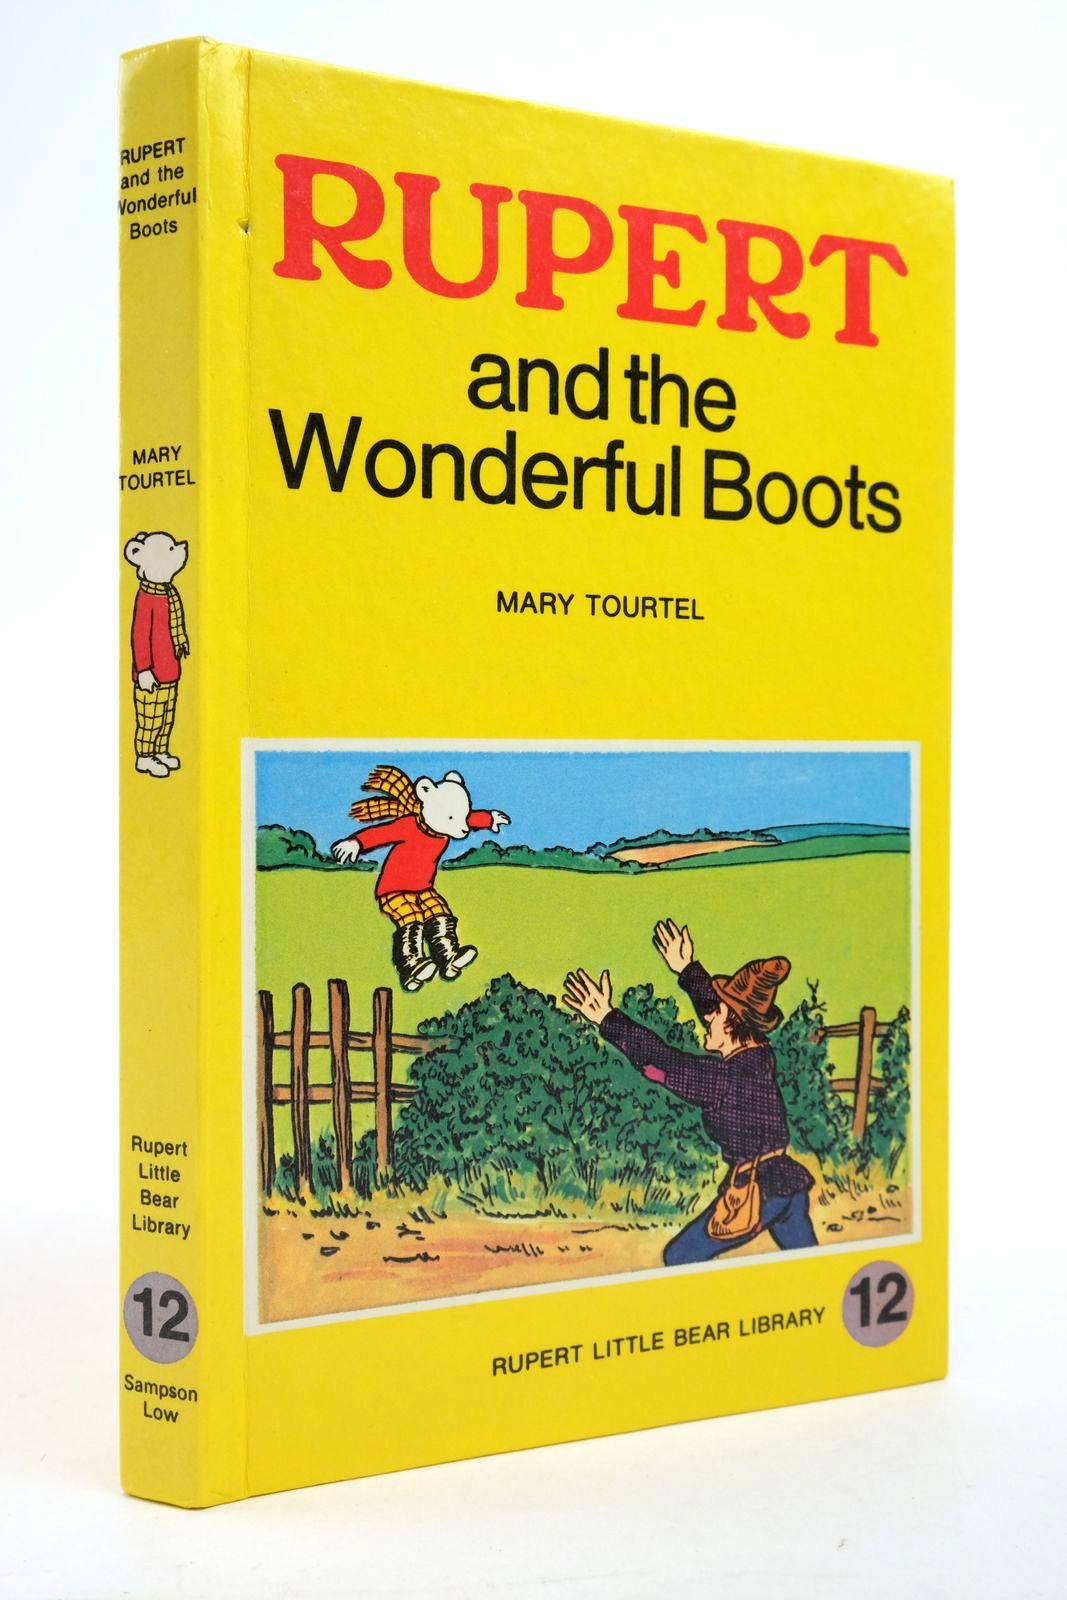 Photo of RUPERT AND THE WONDERFUL BOOTS - RUPERT LITTLE BEAR LIBRARY No. 12 (WOOLWORTH) written by Tourtel, Mary illustrated by Tourtel, Mary published by Sampson Low, Marston &amp; Co. Ltd. (STOCK CODE: 2136966)  for sale by Stella & Rose's Books